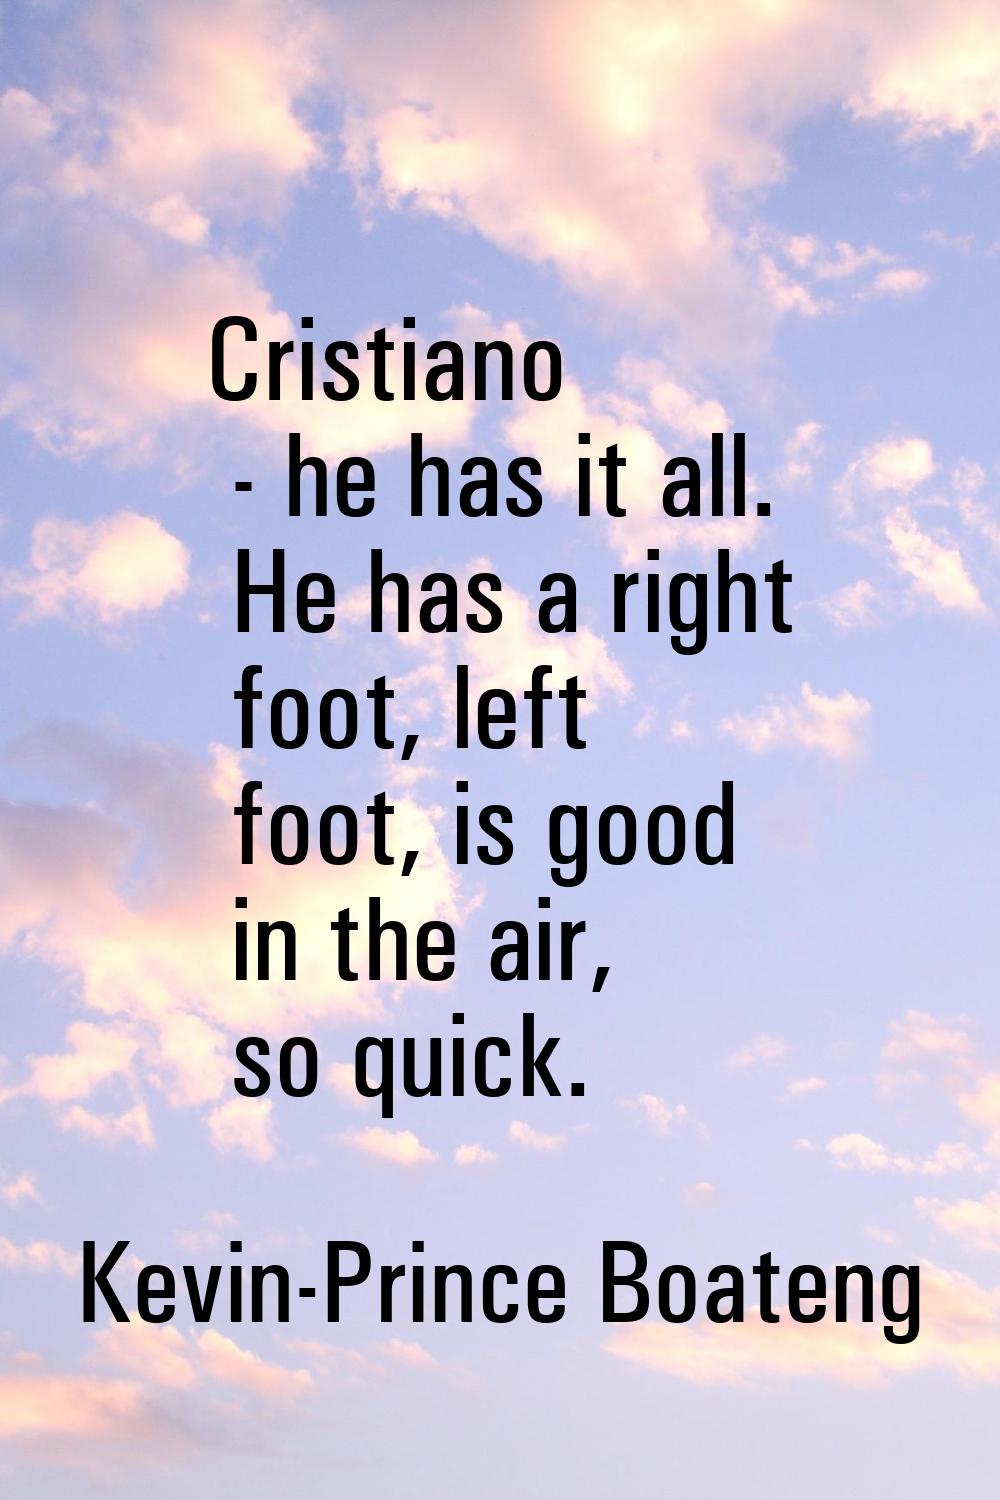 Cristiano - he has it all. He has a right foot, left foot, is good in the air, so quick.